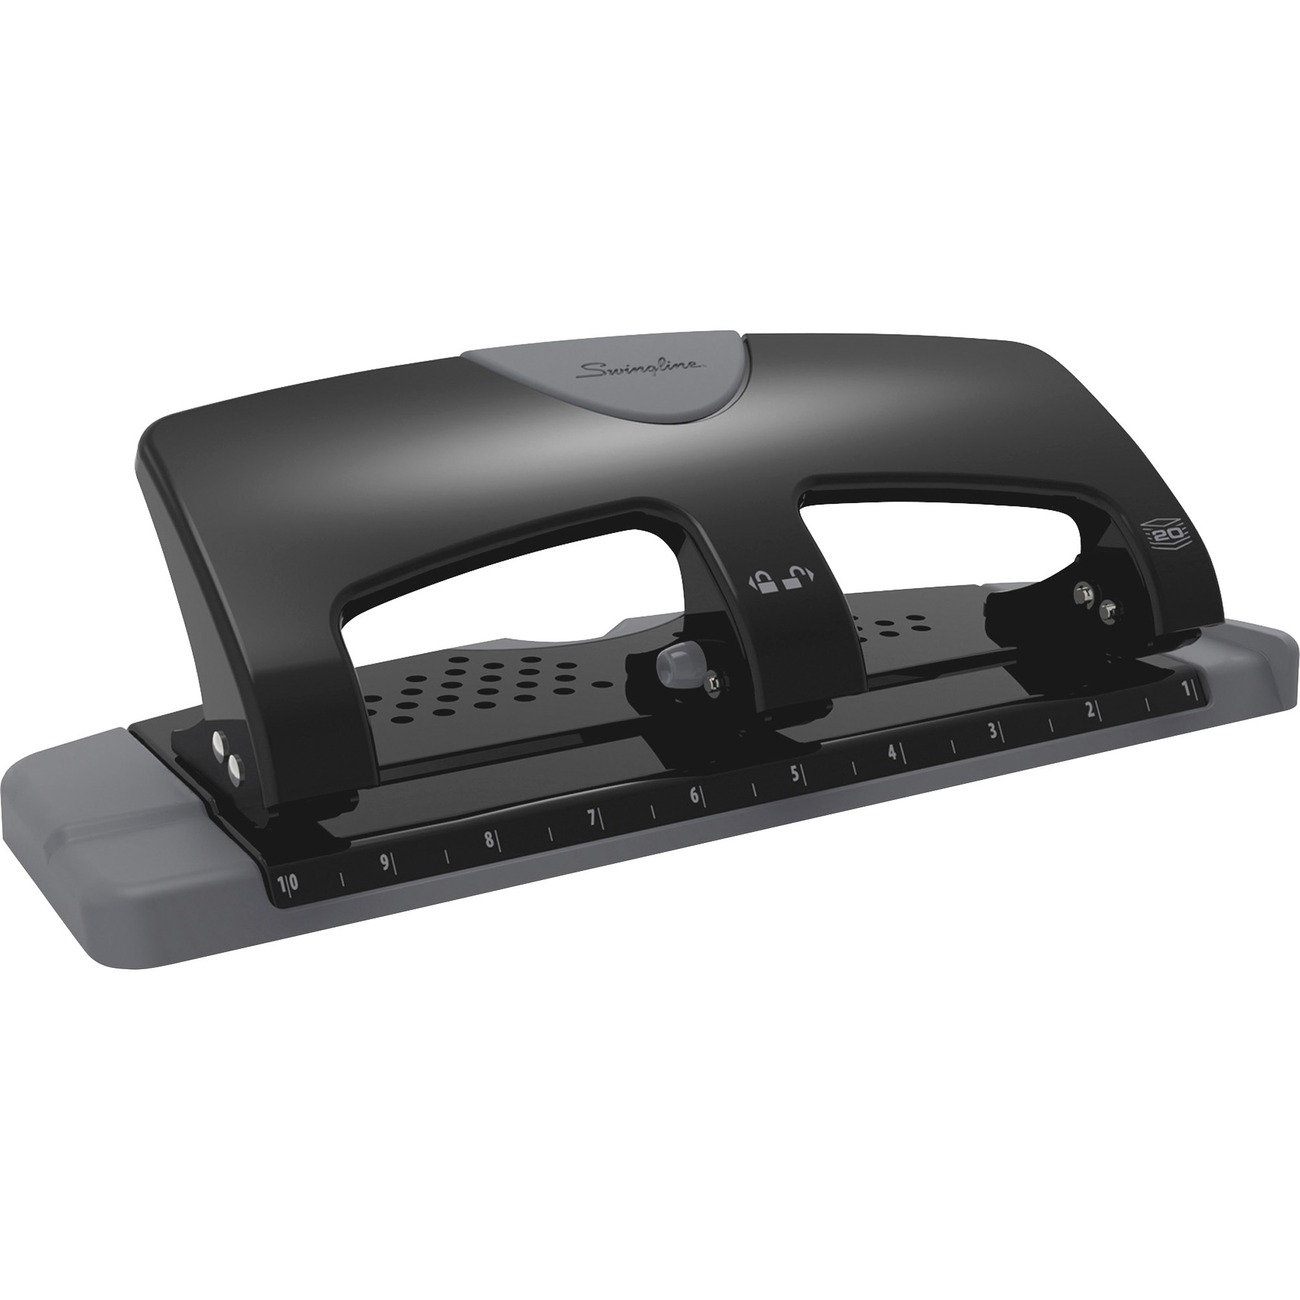 Officemate EZ Lever Adjustable Hole Punch - 3 Punch Head(s) - 15